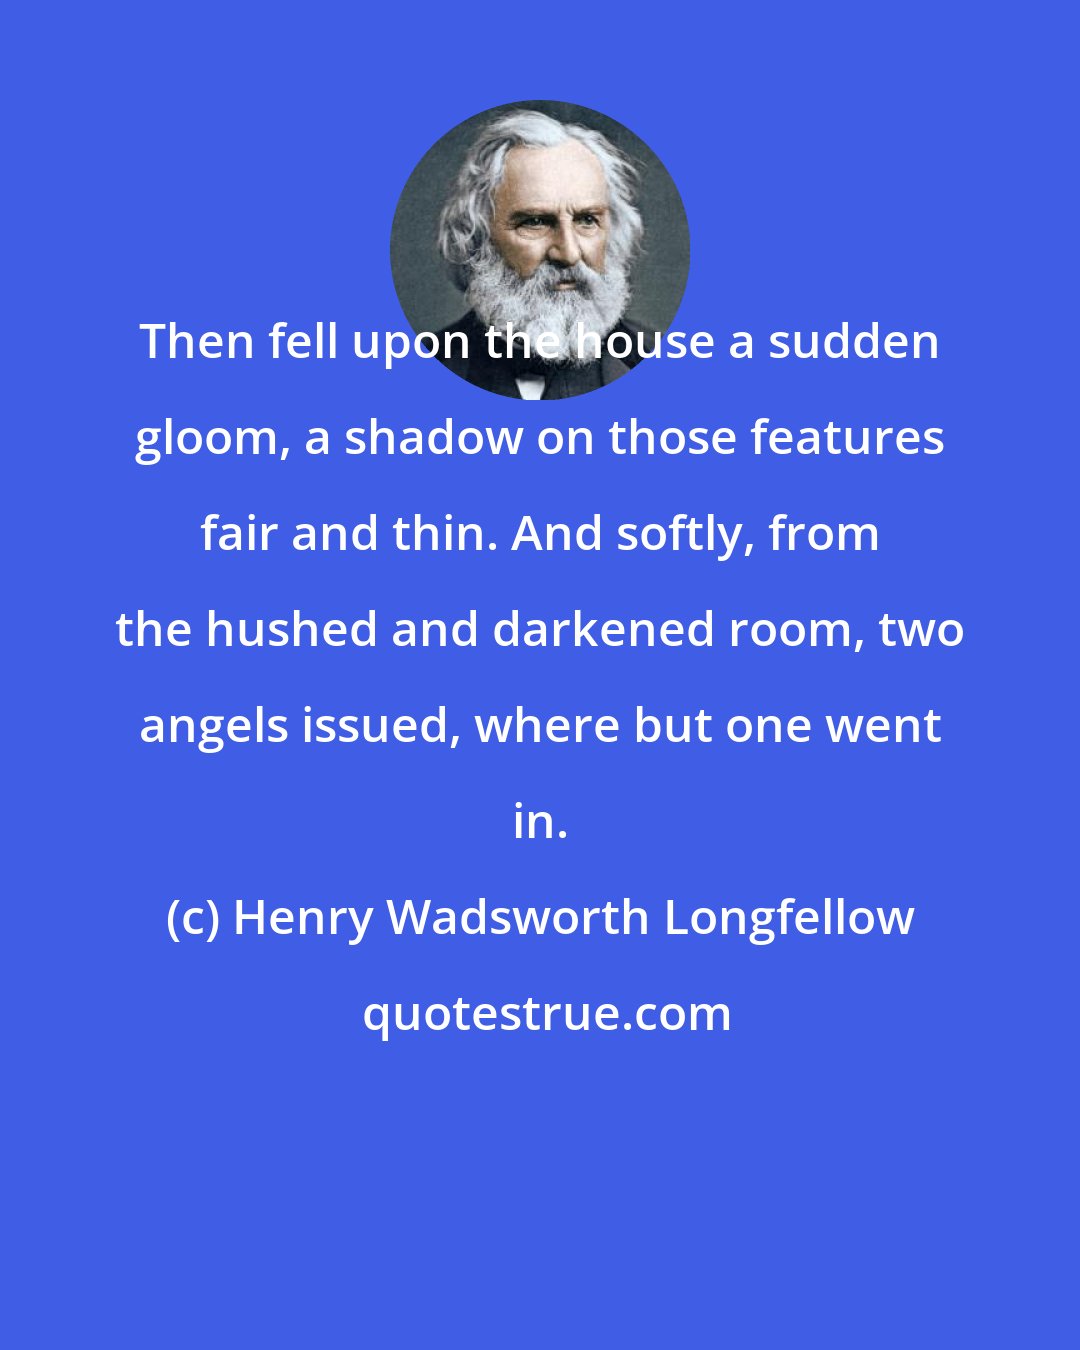 Henry Wadsworth Longfellow: Then fell upon the house a sudden gloom, a shadow on those features fair and thin. And softly, from the hushed and darkened room, two angels issued, where but one went in.